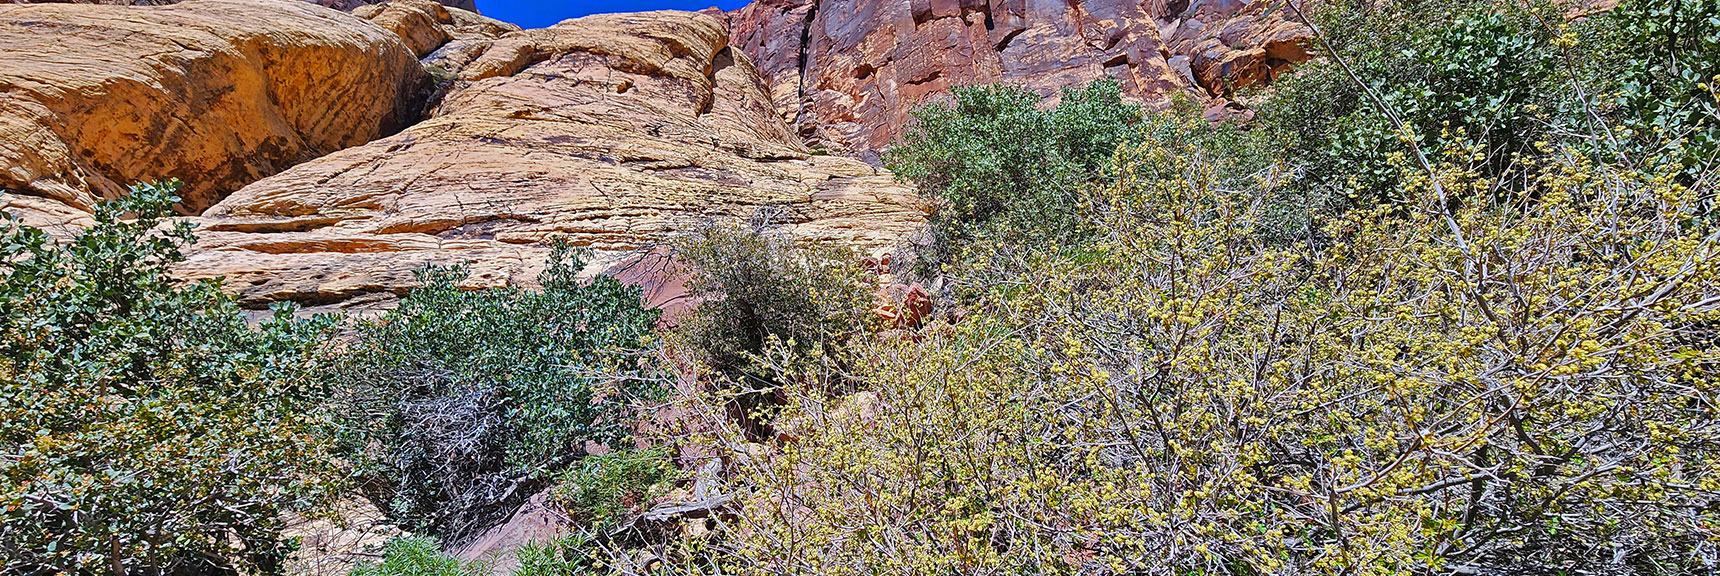 Brief Faint Passage Through Brush at Top of Boulder Field Leads to Sandstone Stretch | Juniper Canyon | Red Rock Canyon National Conservation Area, Nevada | David Smith | LasVegasAreaTrails.com